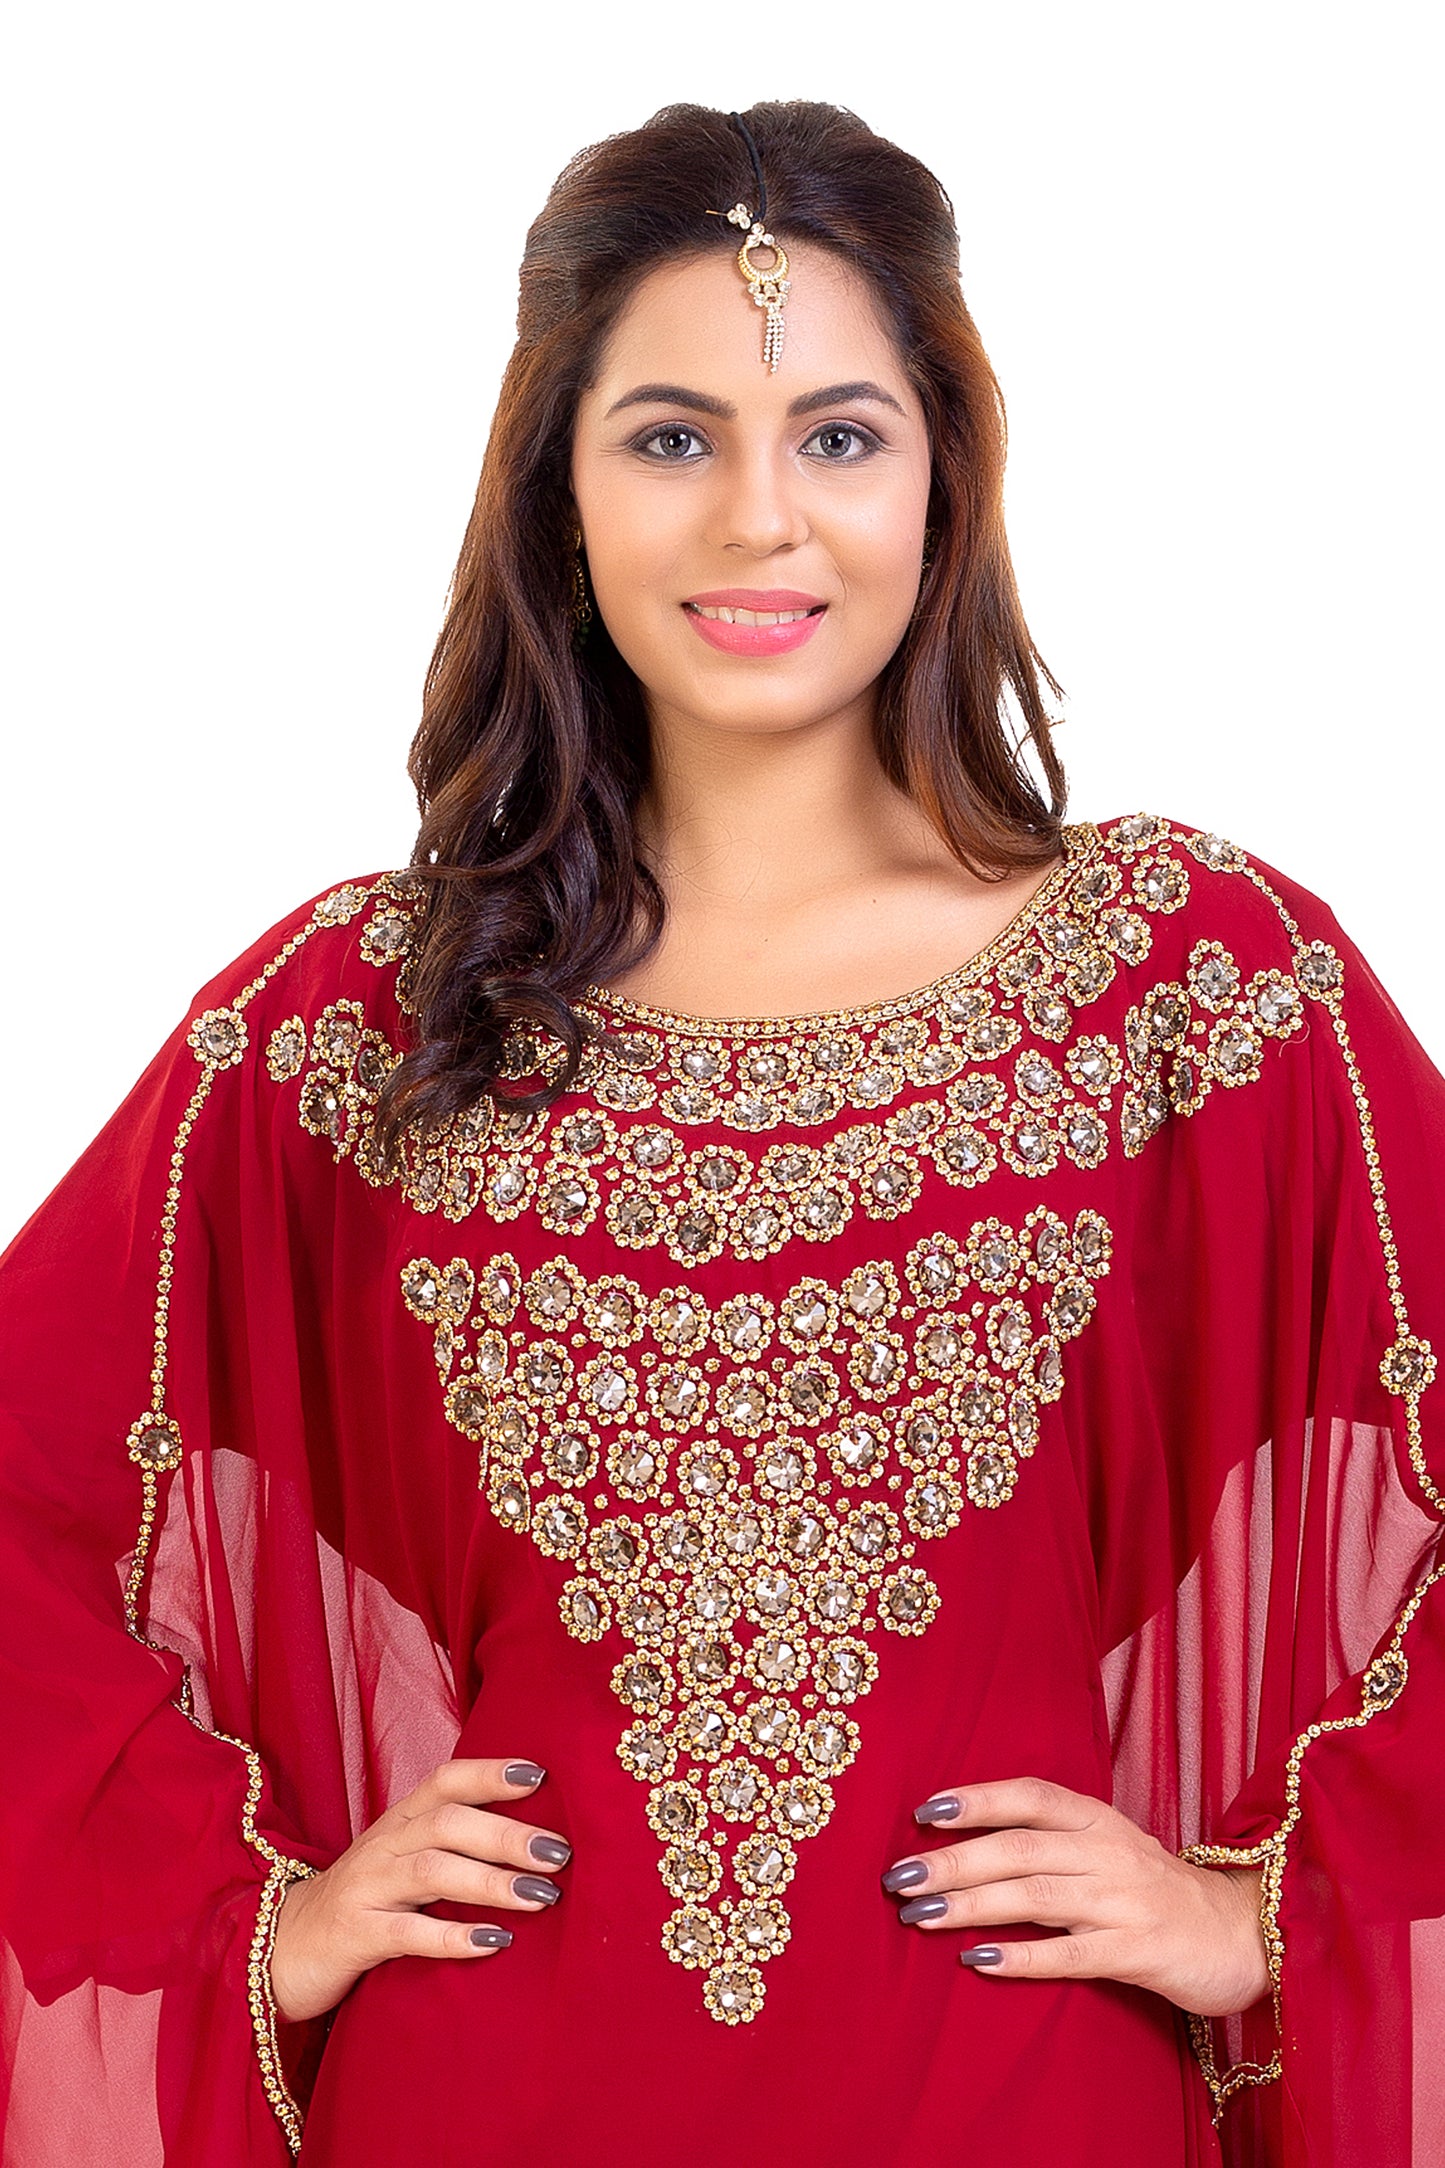 Load image into Gallery viewer, Designer Dubai Kaftan by Maxim Creation with Luxe Crystals - Maxim Creation
